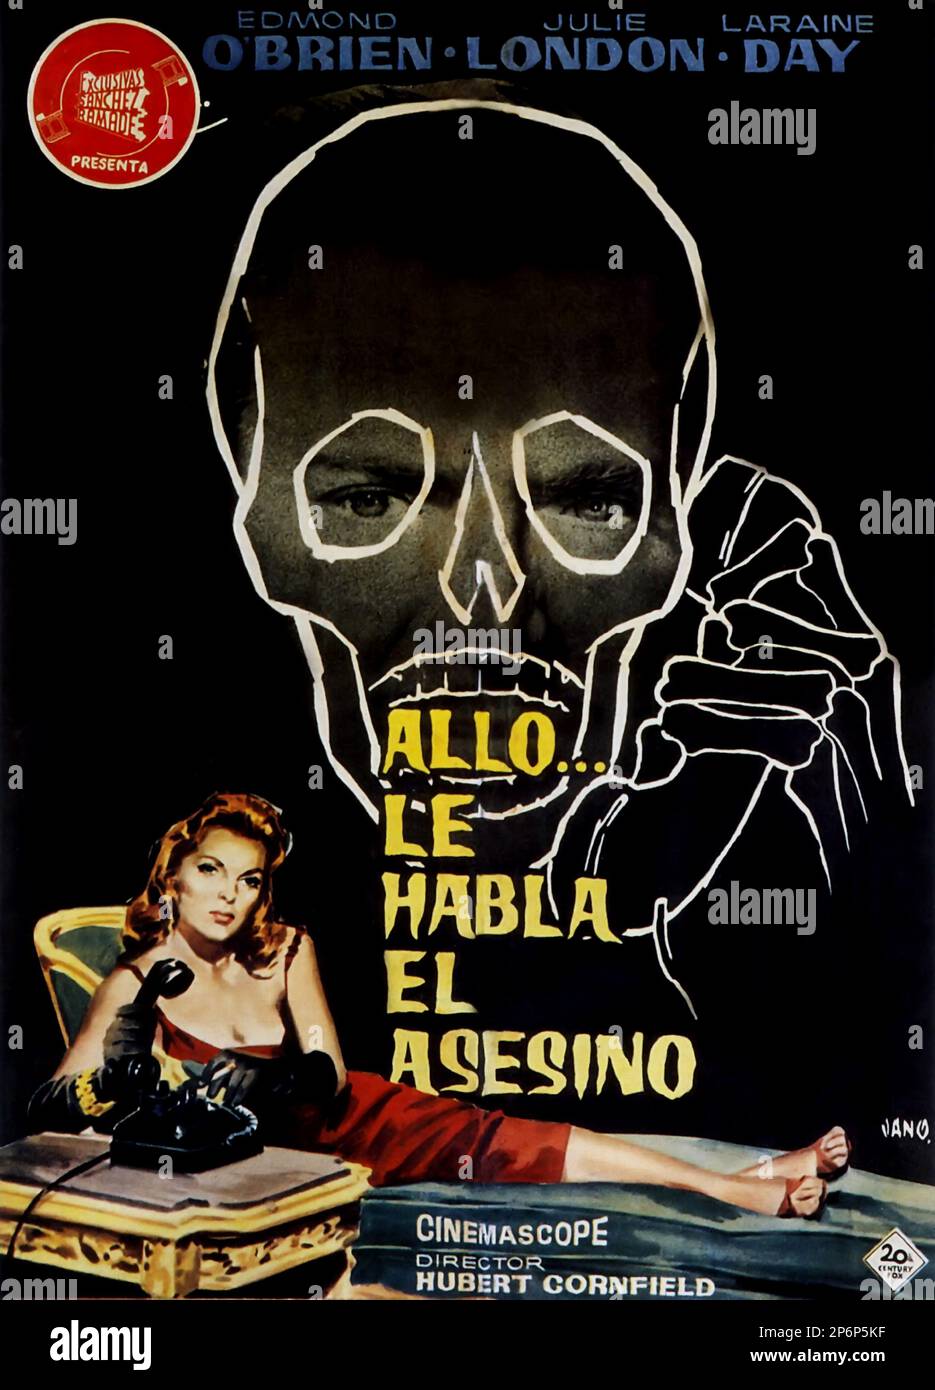 1960 : The FILM NOIR  movie  THE THIRD VOICE by Hubert Cornfield , with Edmond O'Brien , Julie LONDON and Laraine Day , from a novel by Charles Williams . Advertising poster from Spain  - FILM - CINEMA   - poster pubblicitario - poster - advertising - locandina   - DIVA - DIVINA - DIVINE - VAMP - FEMME FATAL -  ----  Archivio GBB Stock Photo